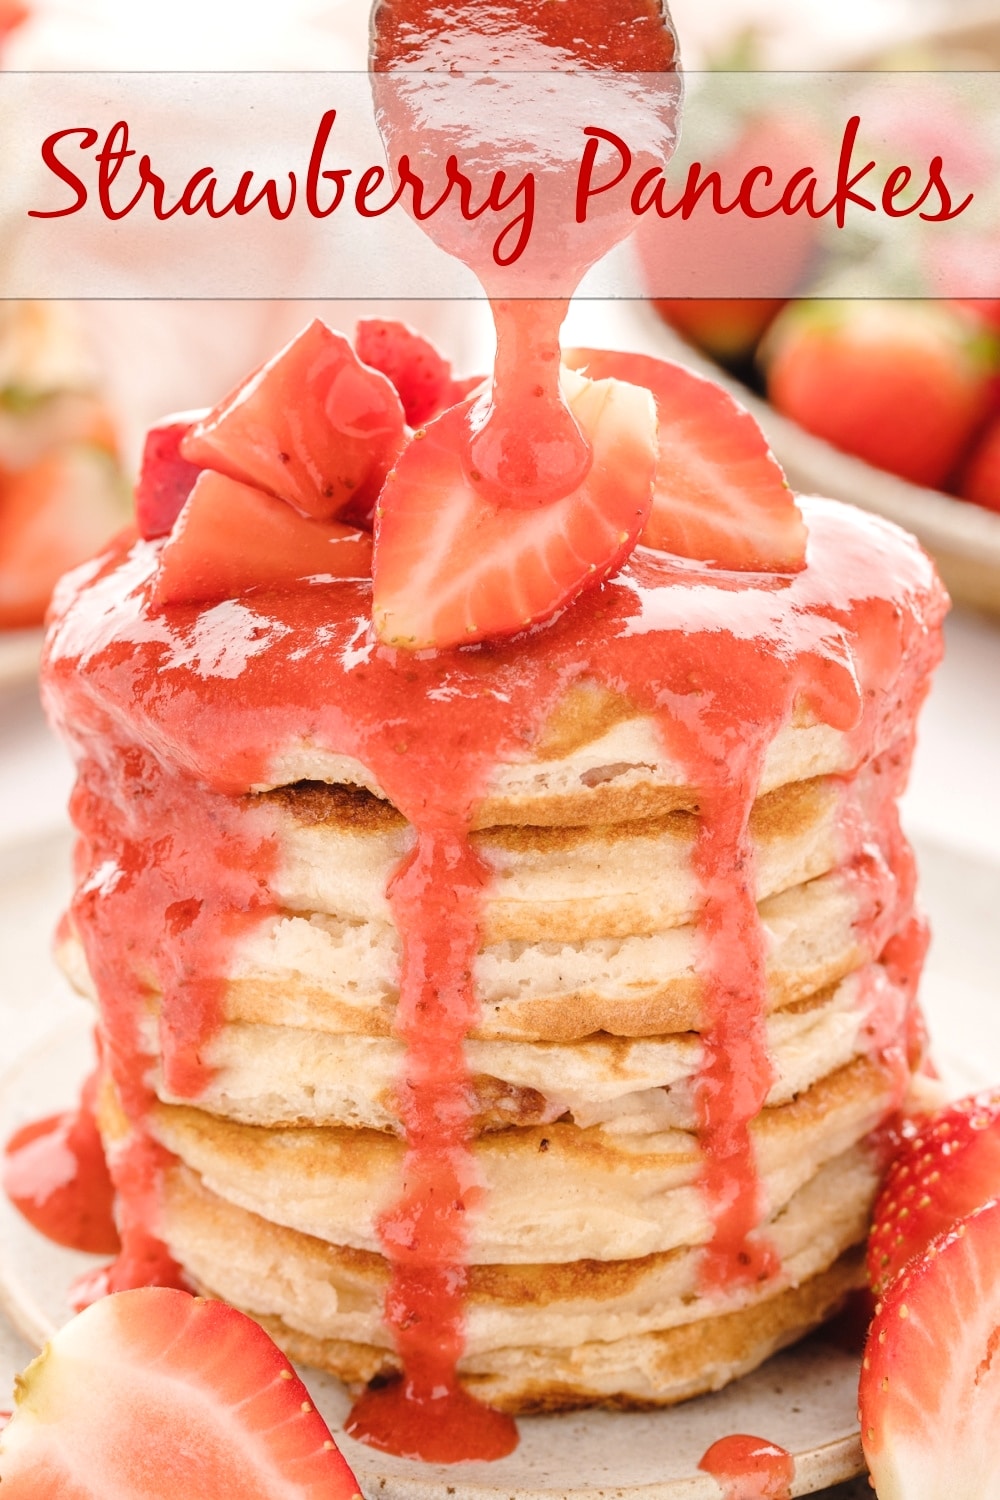 Indulge in the fluffy perfection of Strawberry Buttermilk Pancakes with Strawberry Sauce. This mouthwatering recipe takes your love for buttermilk pancakes to new heights. Discover the ultimate combination of light, fluffy pancakes and the sweet tanginess of fresh strawberries. Perfect for brunch or a breakfast treat.  via @cmpollak1